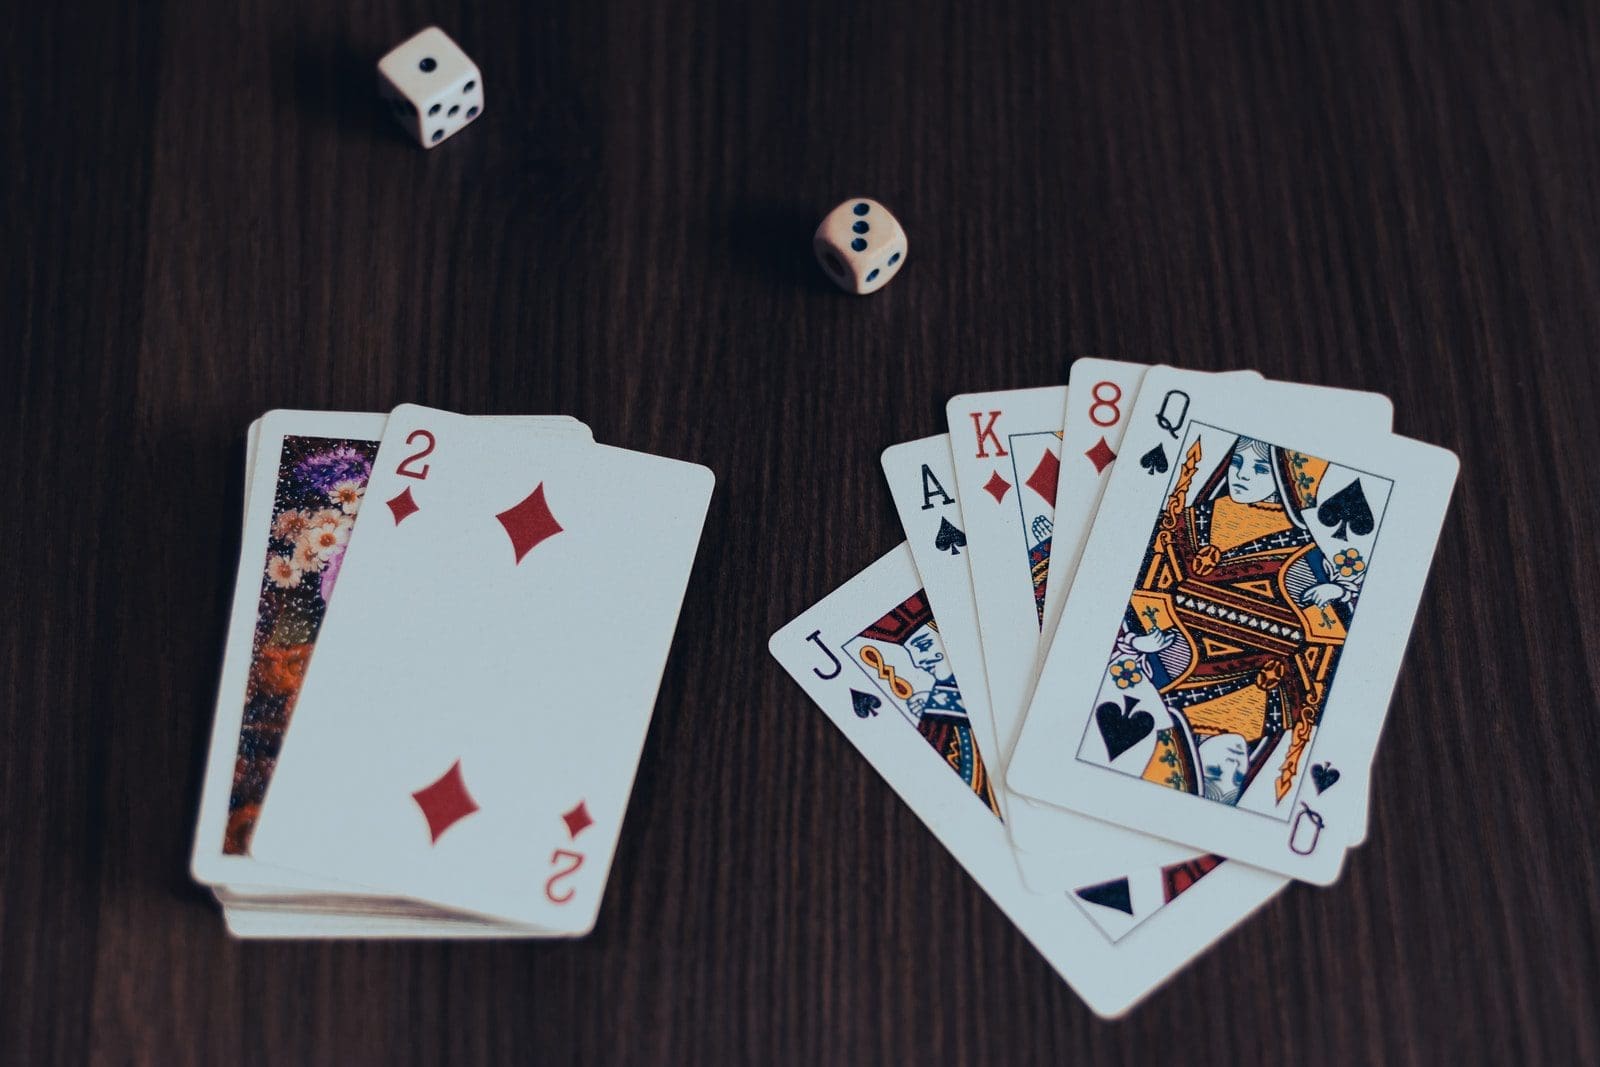 online poker playing cards on brown wooden table